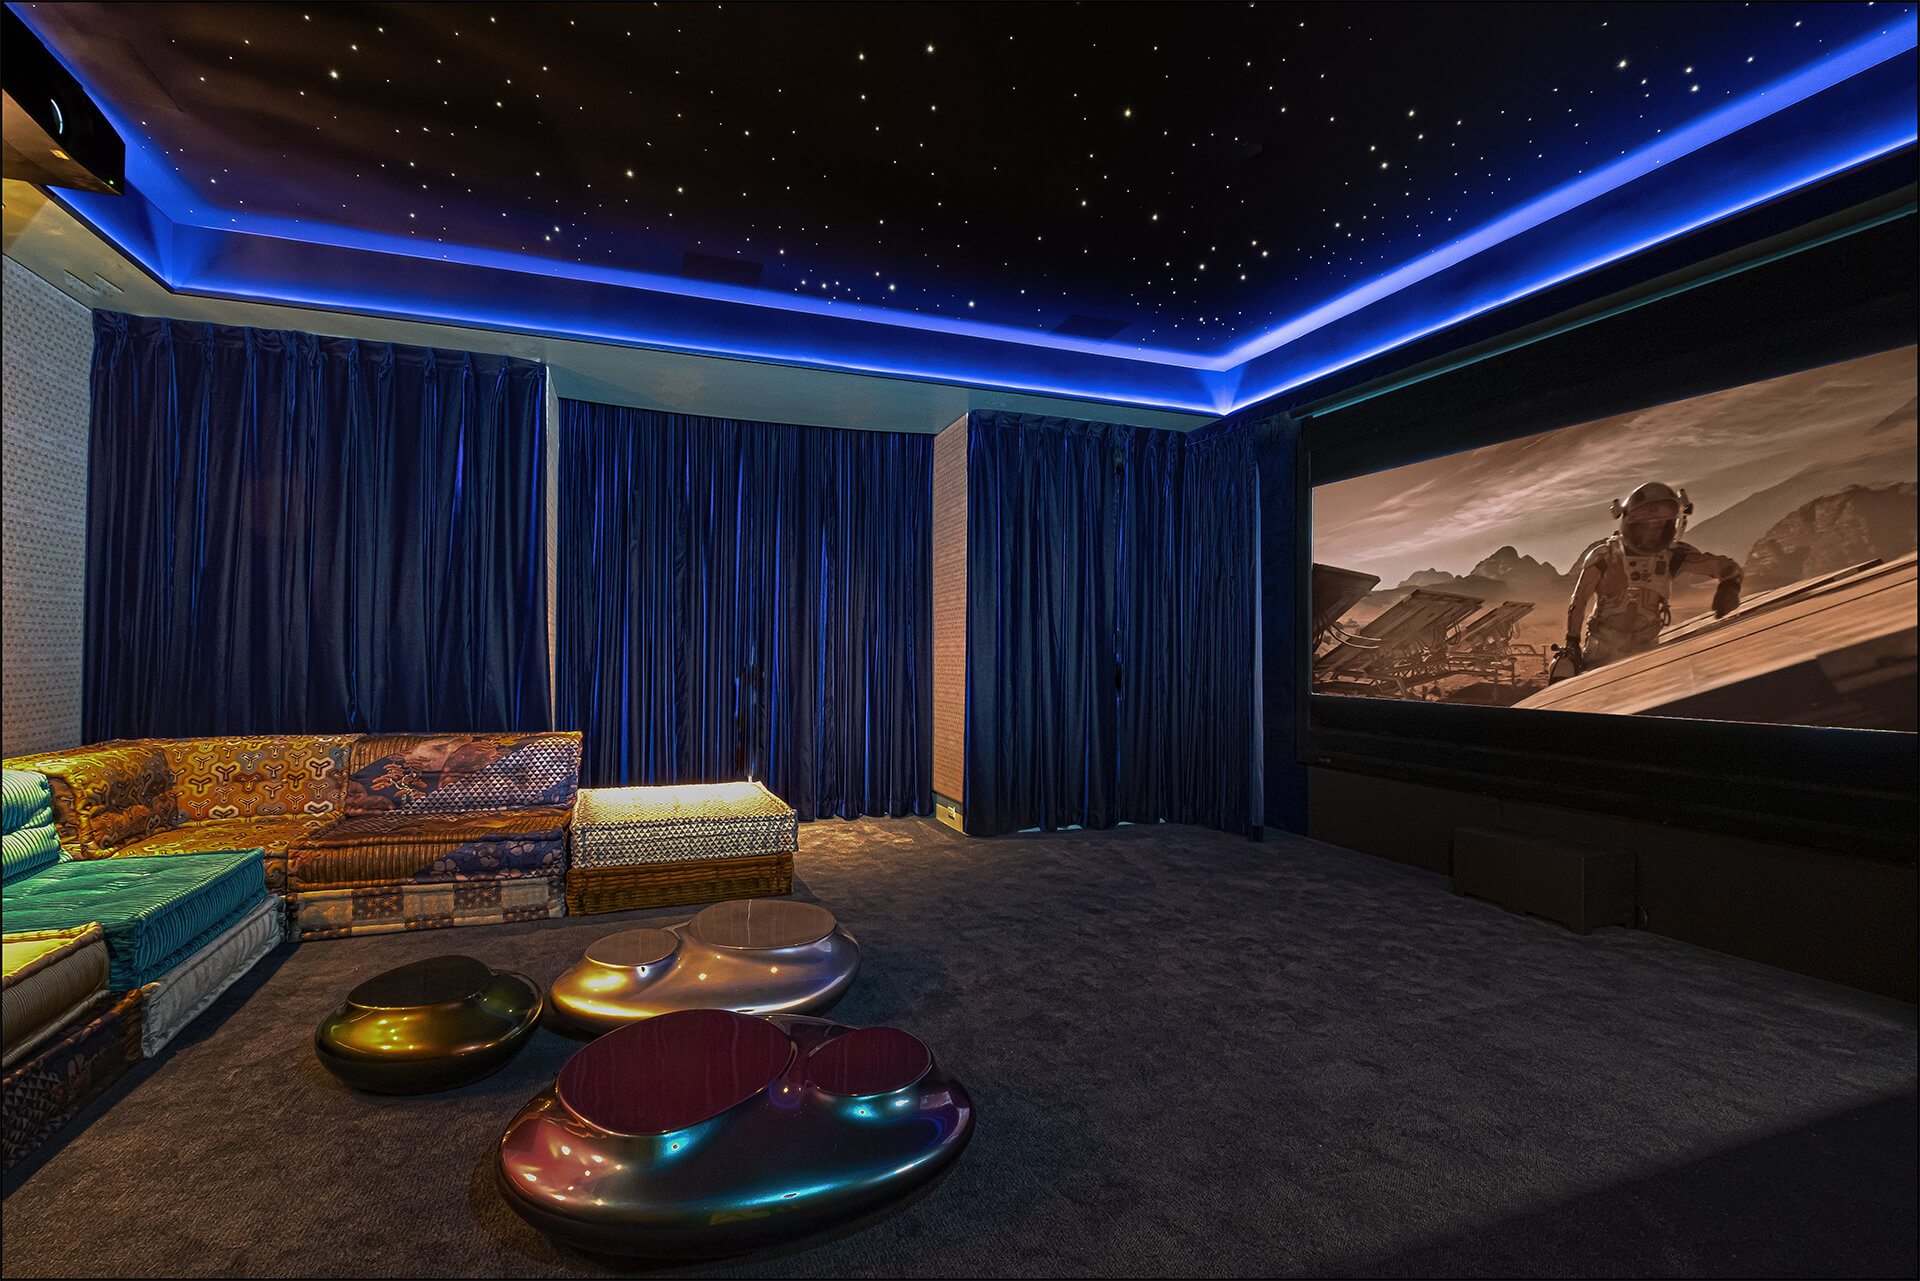 San Diego Home Theater Installation, Audio Video & Smart Home Automation